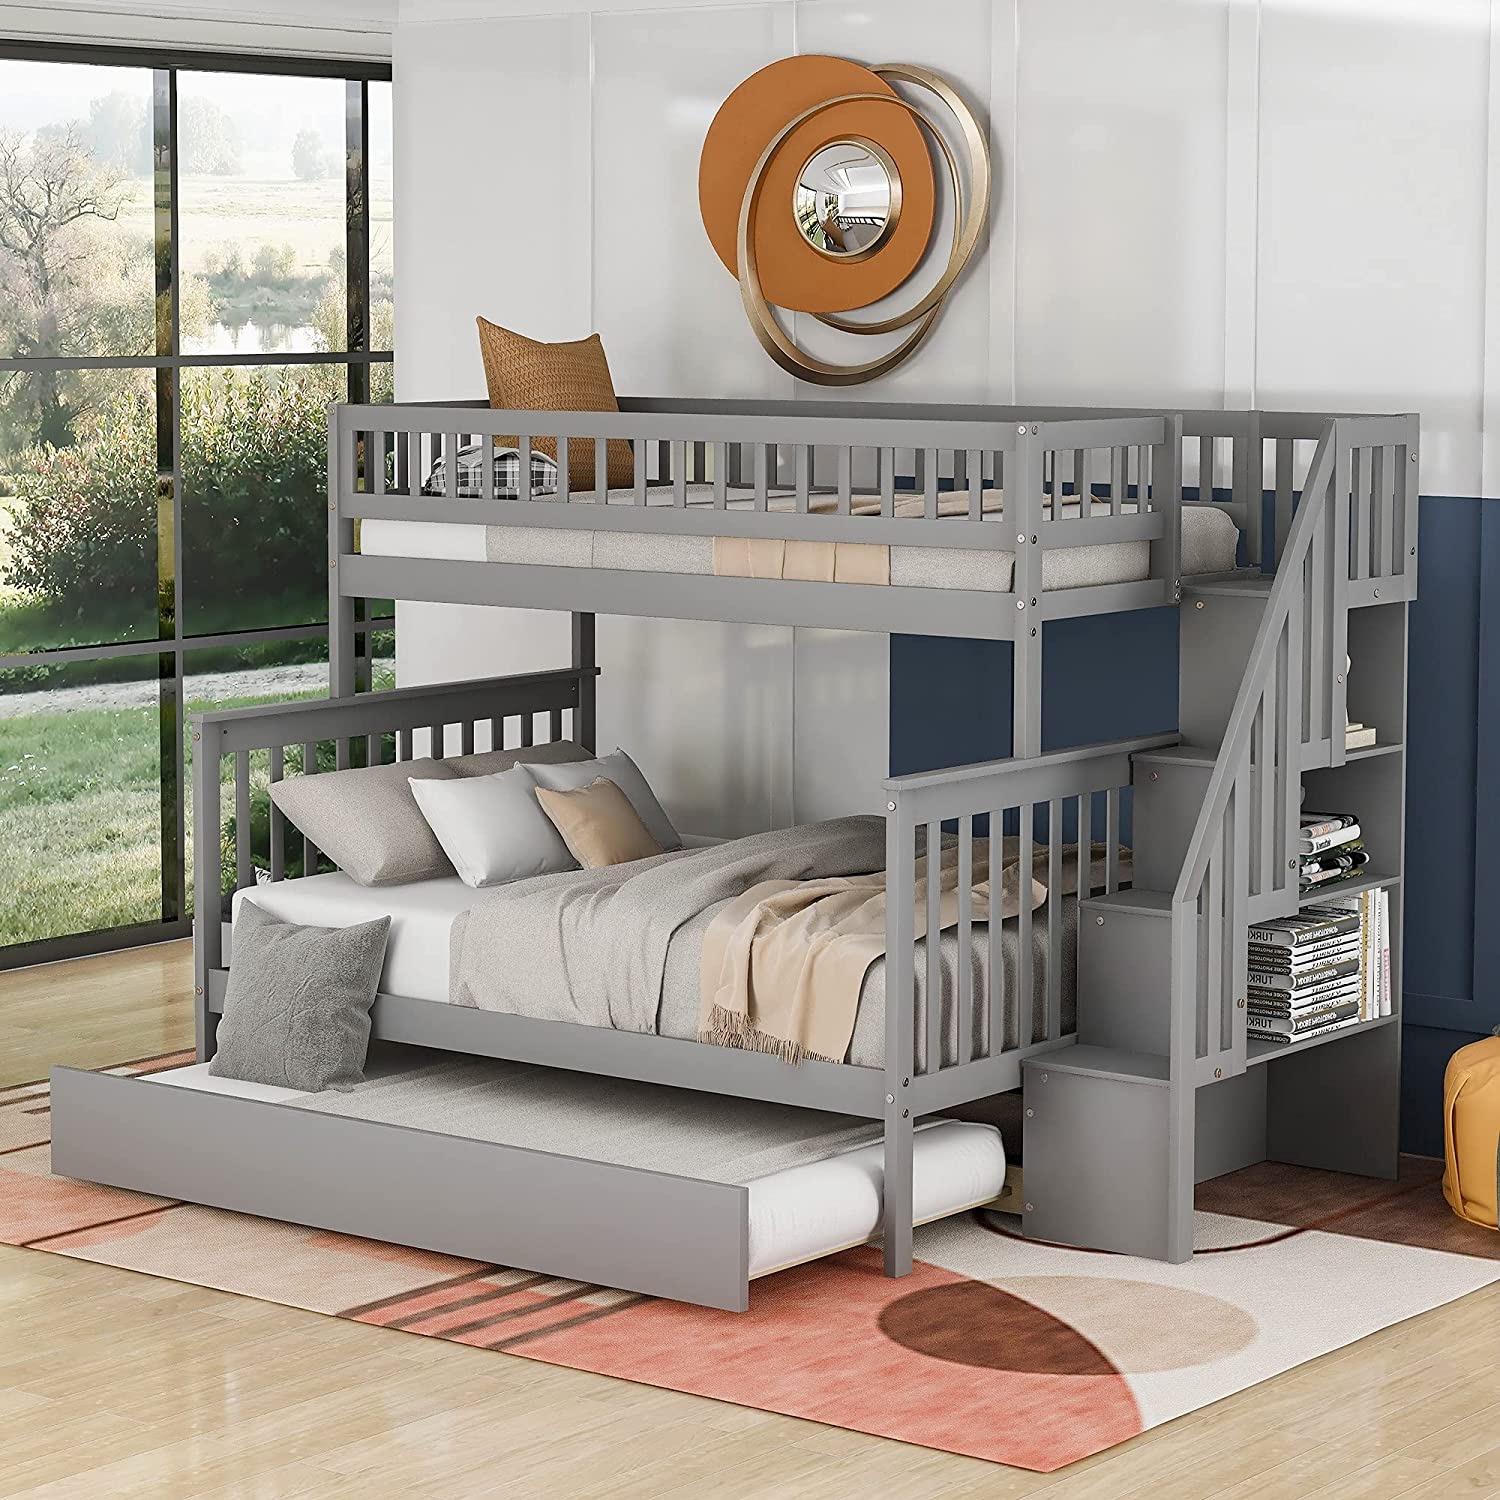 This bunk bed and trundle bed unit provides sleeping space for three children while taking up the floor space of one bed.